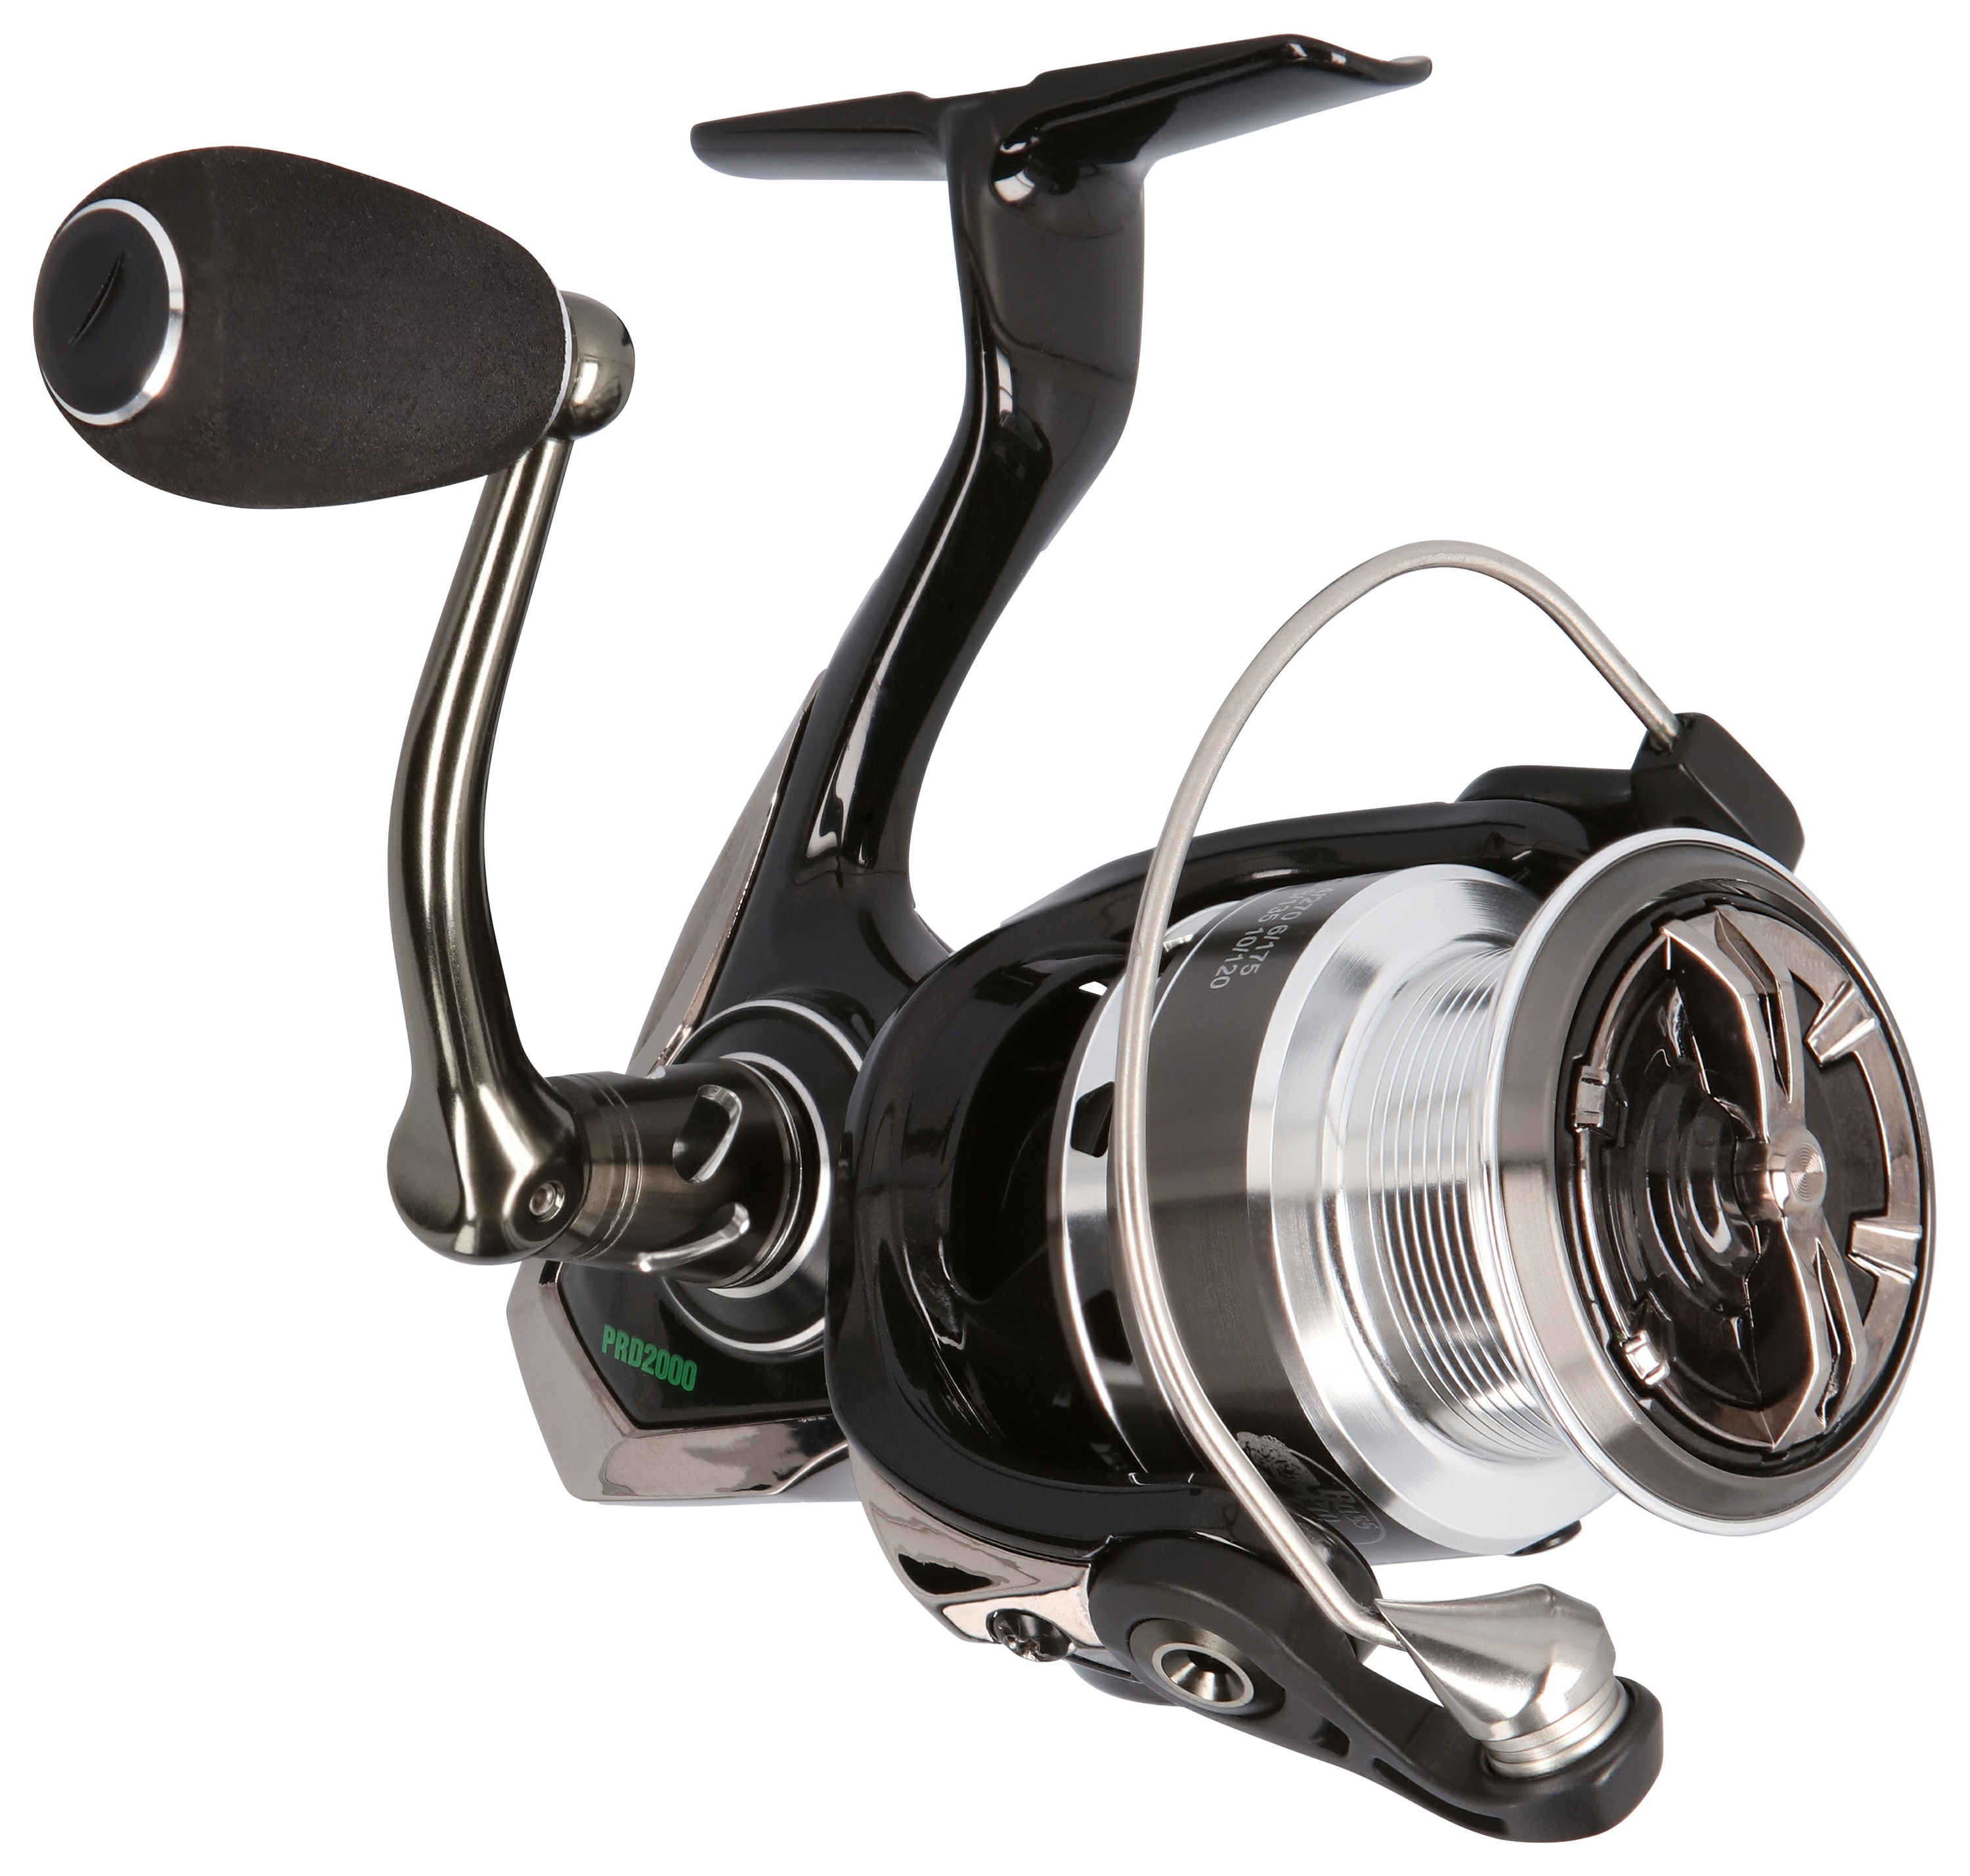 Shimano offering full-complement fishing reel maintenance and